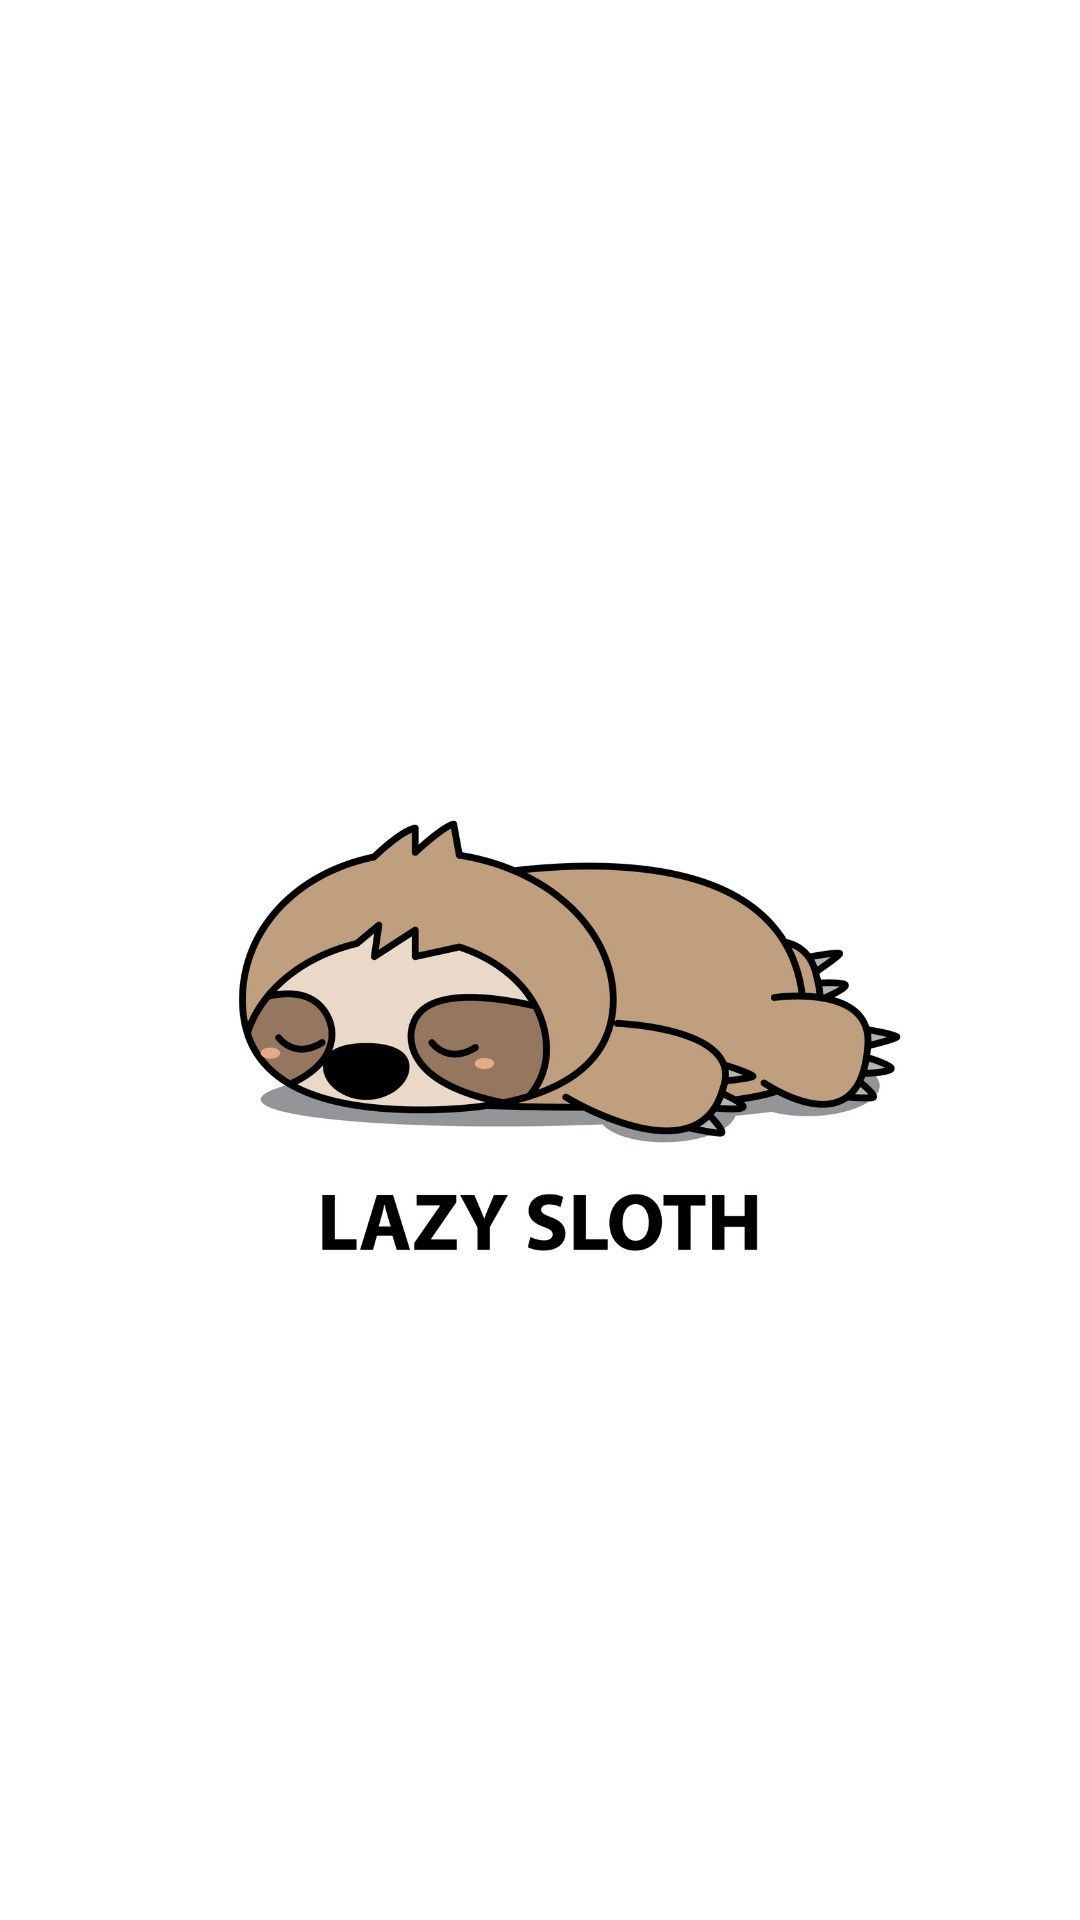 Lazy sloth, could also say happy or active or anything #cutesloth Lazy sloth, could also say happy or. Cute cartoon wallpaper, Sloth, Cartoon wallpaper iphone